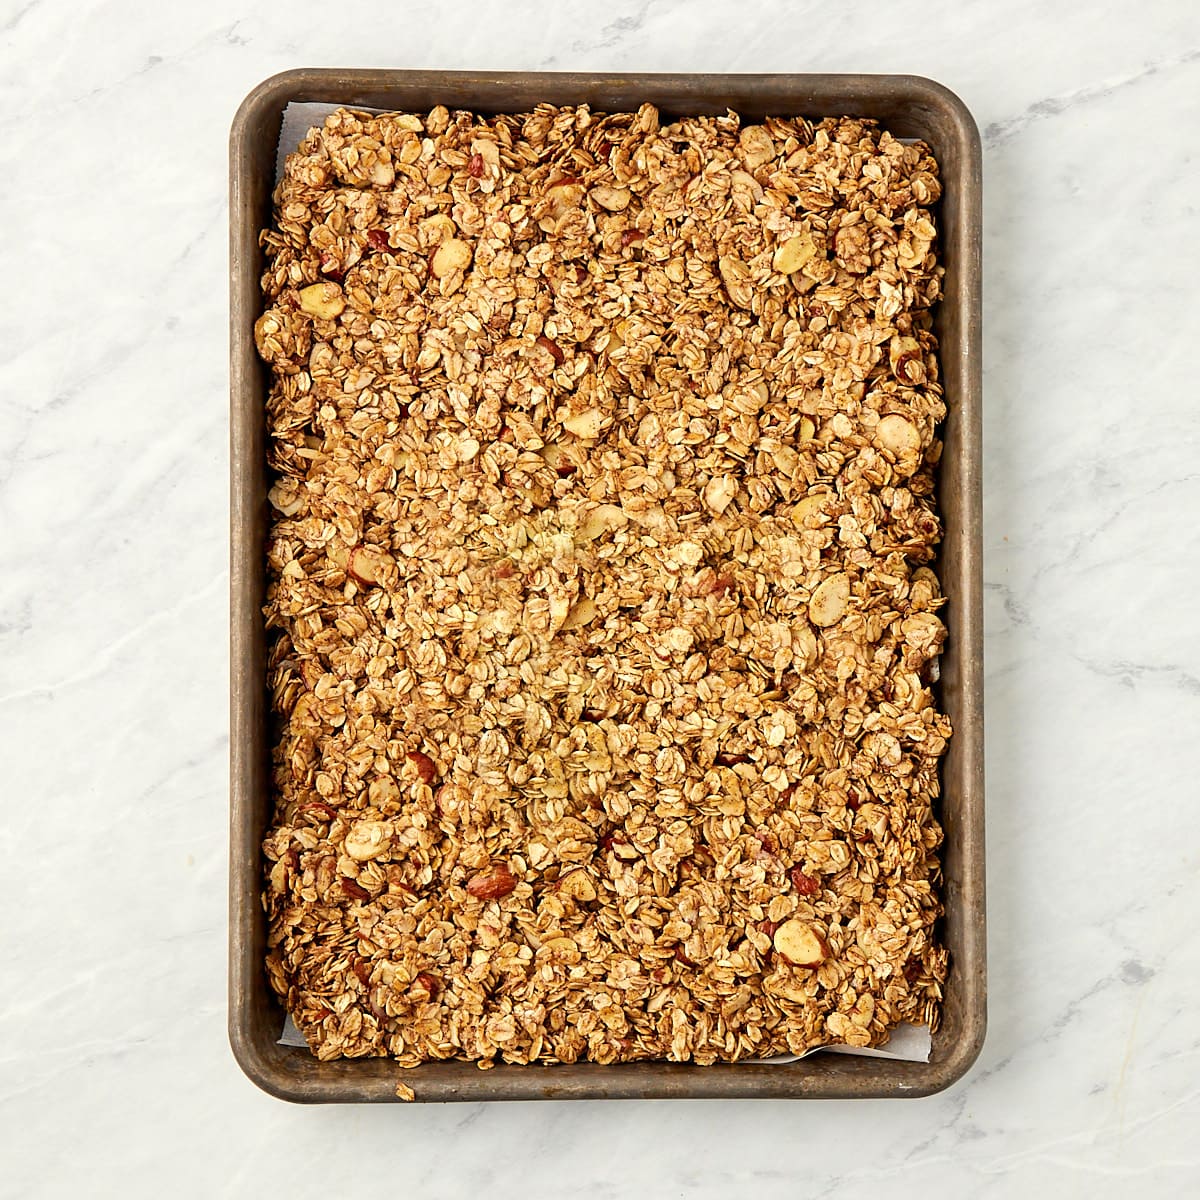 uncooked granola on a cookie sheet spread into an even layer.